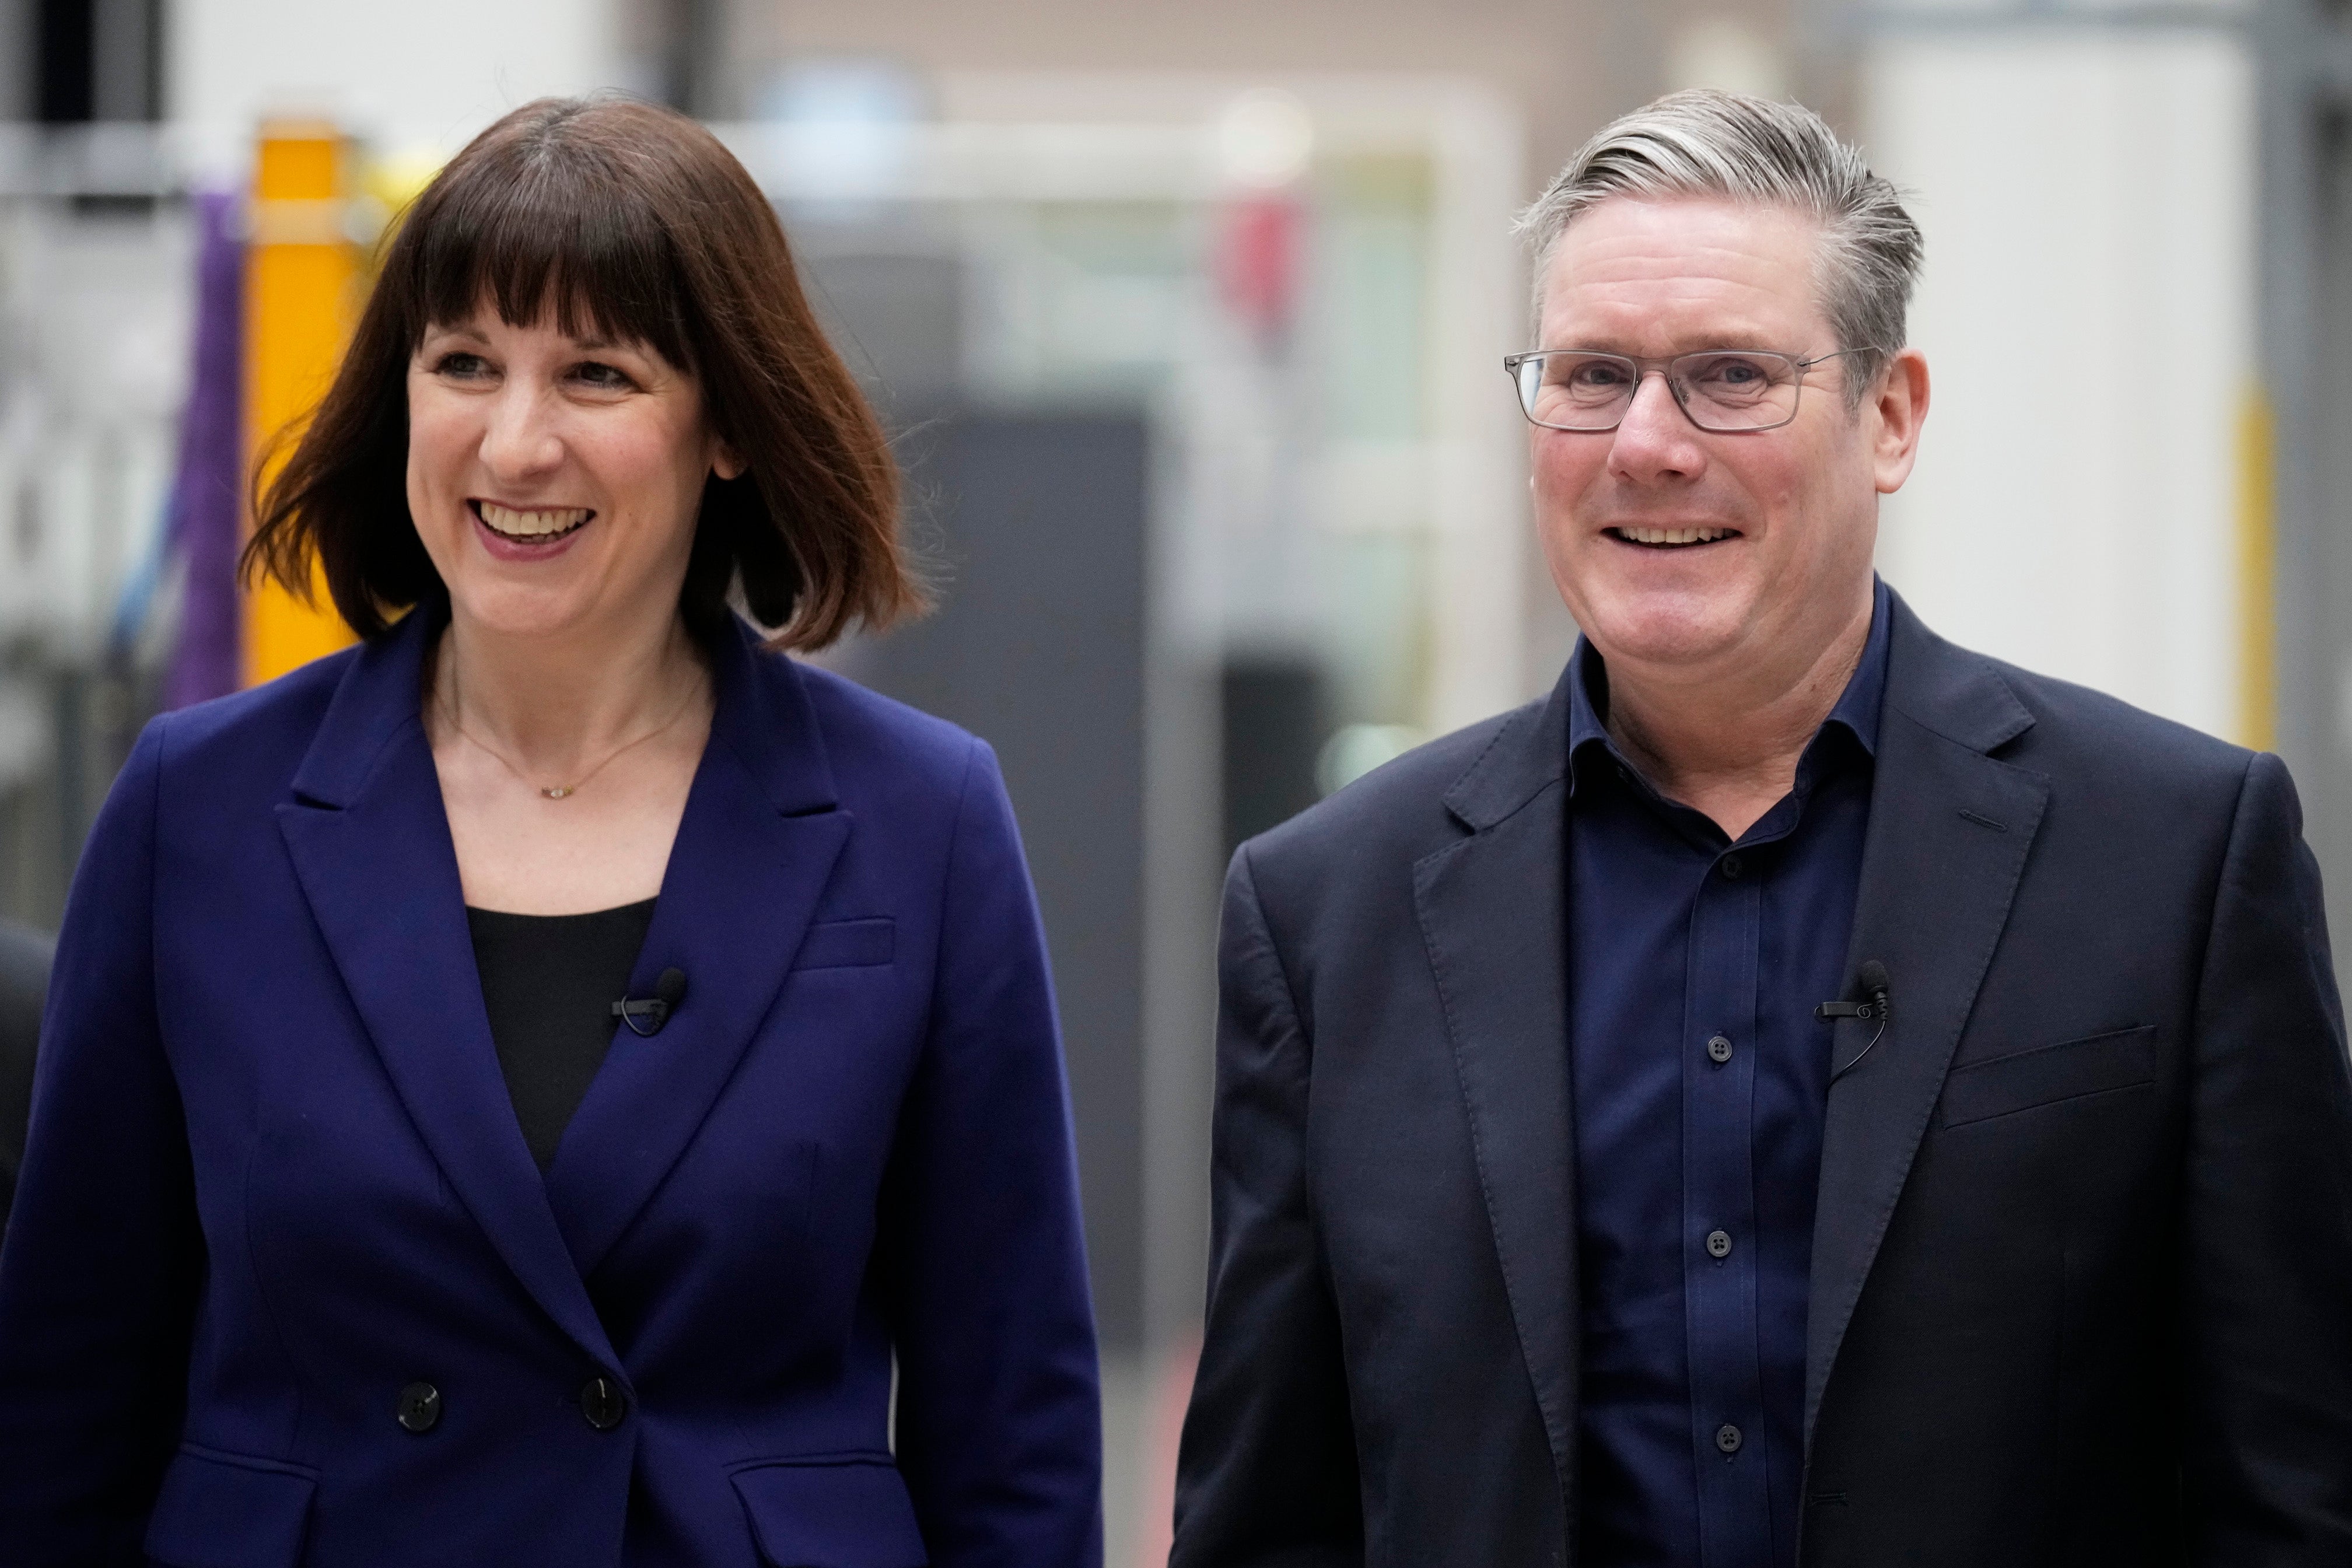 Rachel Reeves and Keir Starmer told reporters in Westminster that the flagship green policy had been scaled back